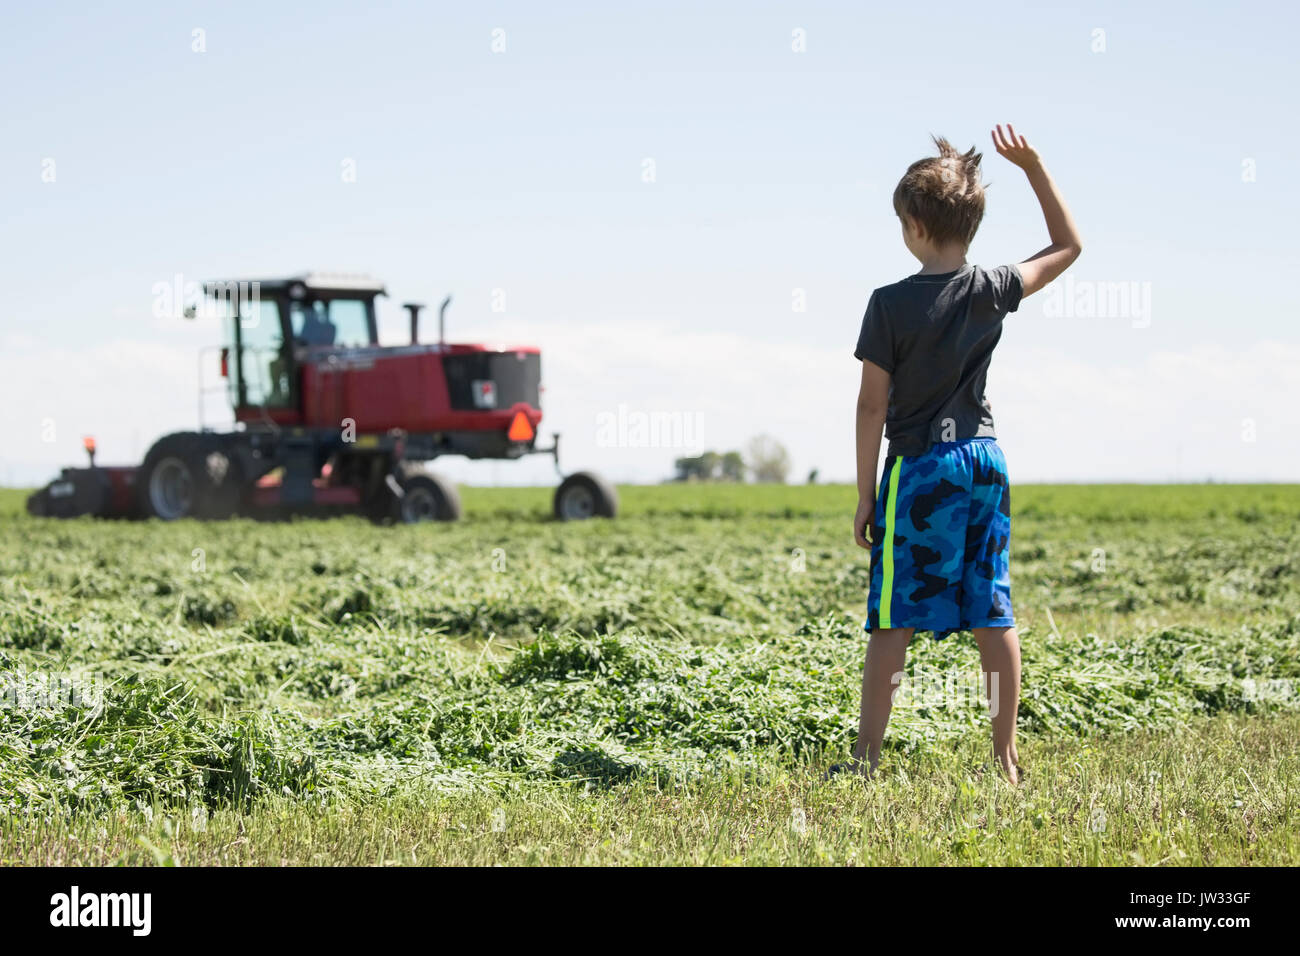 USA, Colorado, Rear view of boy (8-9) standing in field and waving to father driving combine harvester in field Stock Photo